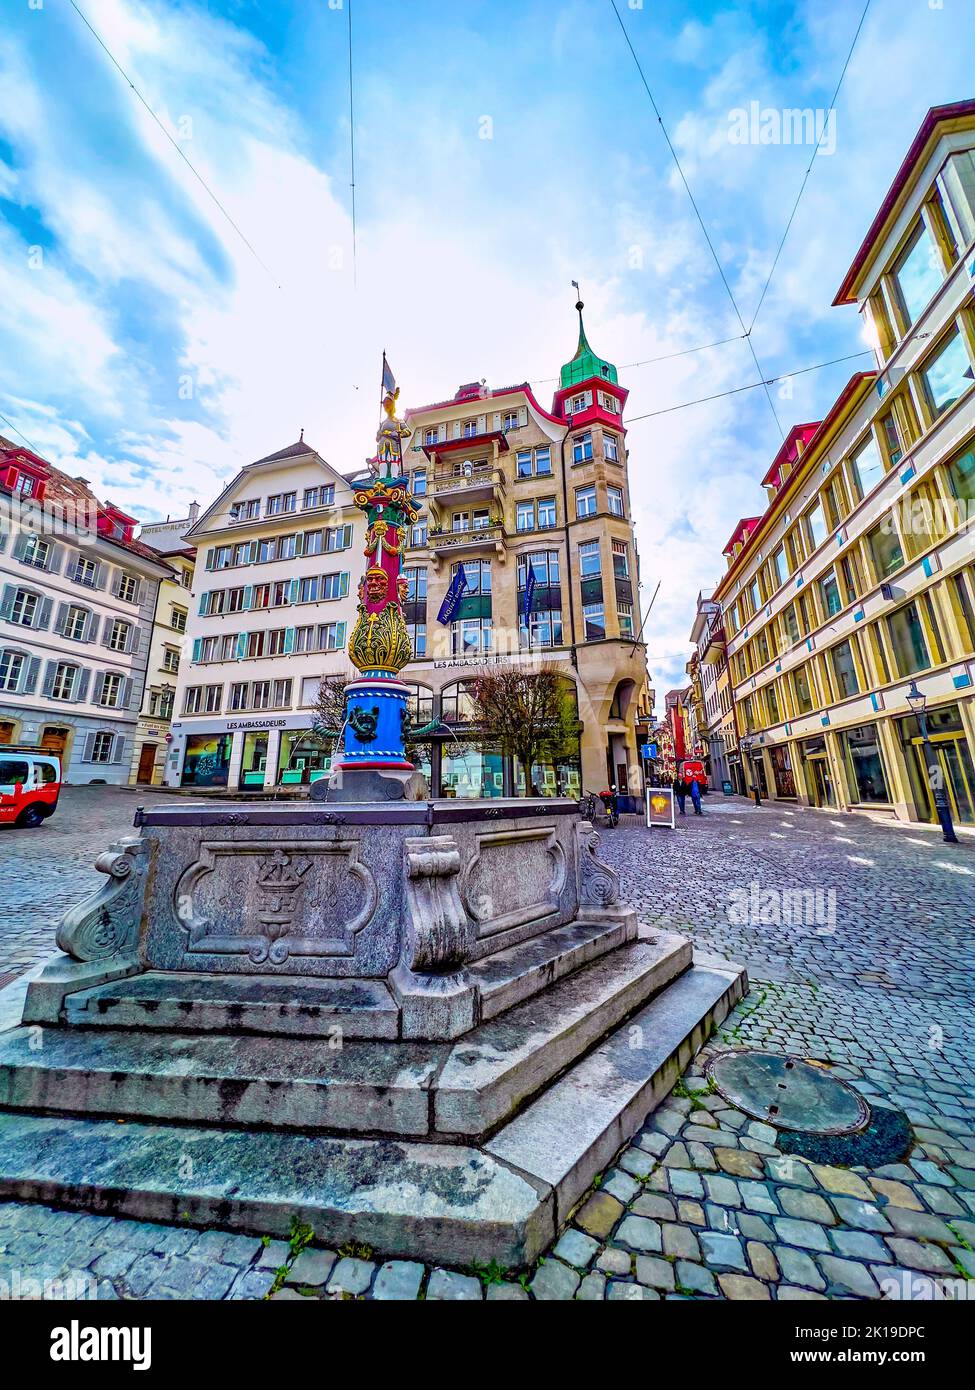 LUCERNE, SWITZERLAND - MARCH 30, 2022: Historical colorful Fritschi Fountain in the middle of Kapellplatz, on March 30 in Lucerne, Switzerland Stock Photo